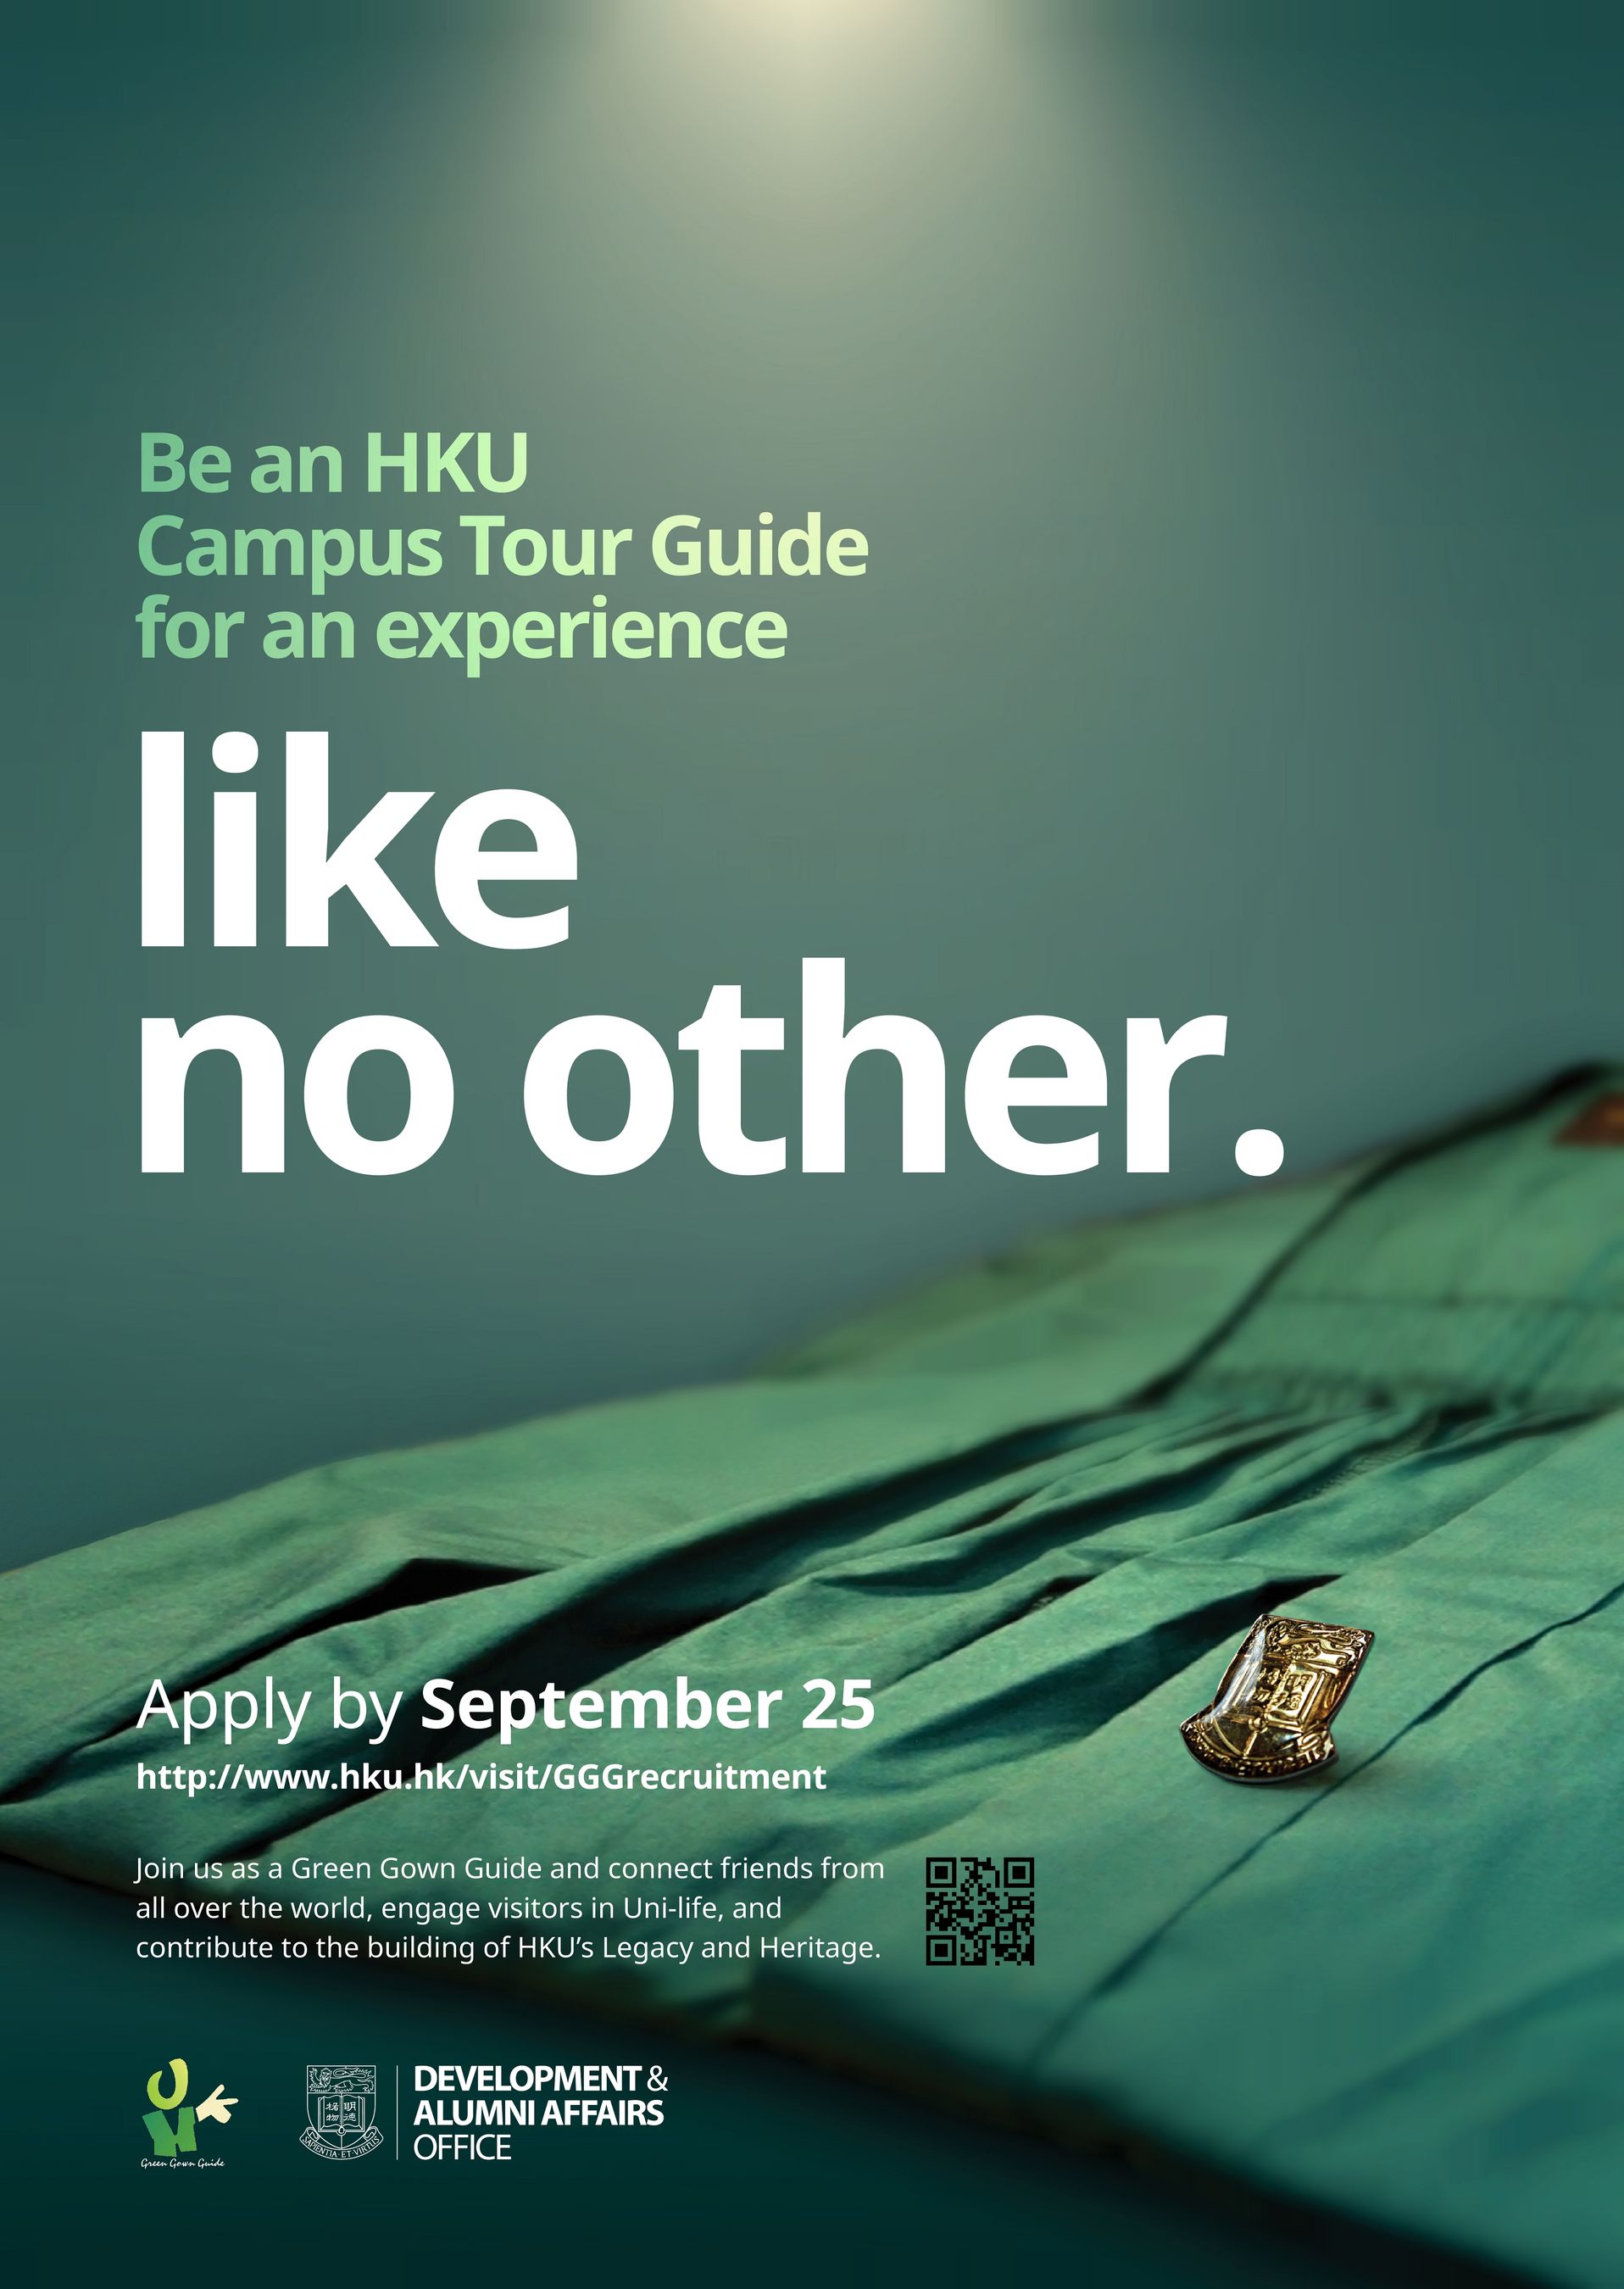 Be an HKU Campus Tour Guide